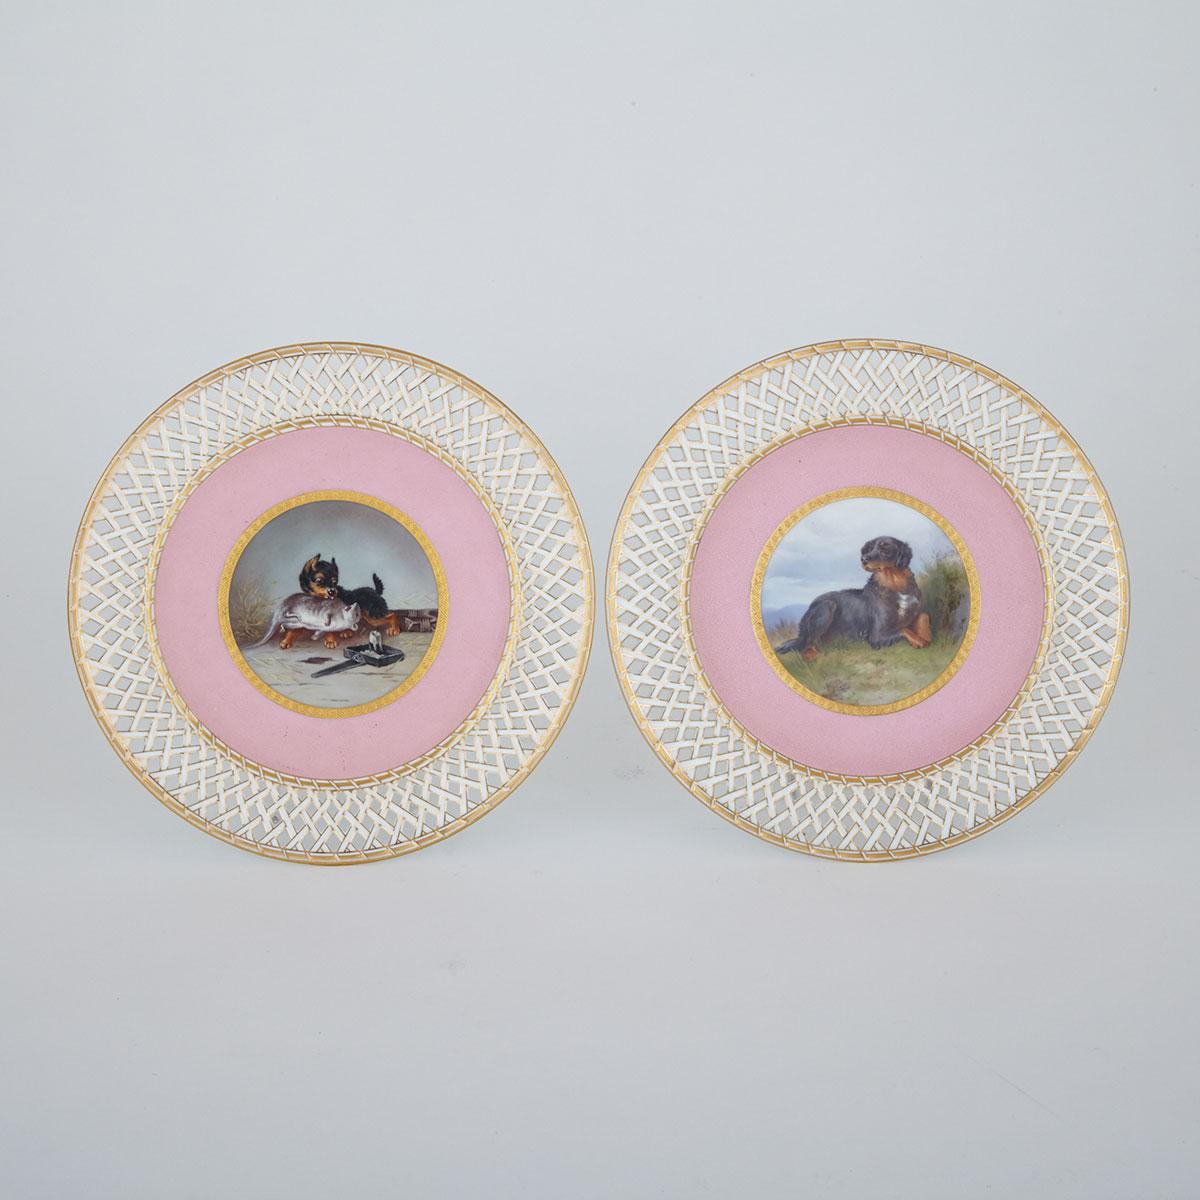 Pair of Minton Reticulated Cabinet Plates, probably painted by Henry Mitchell, 1872 and 1876 